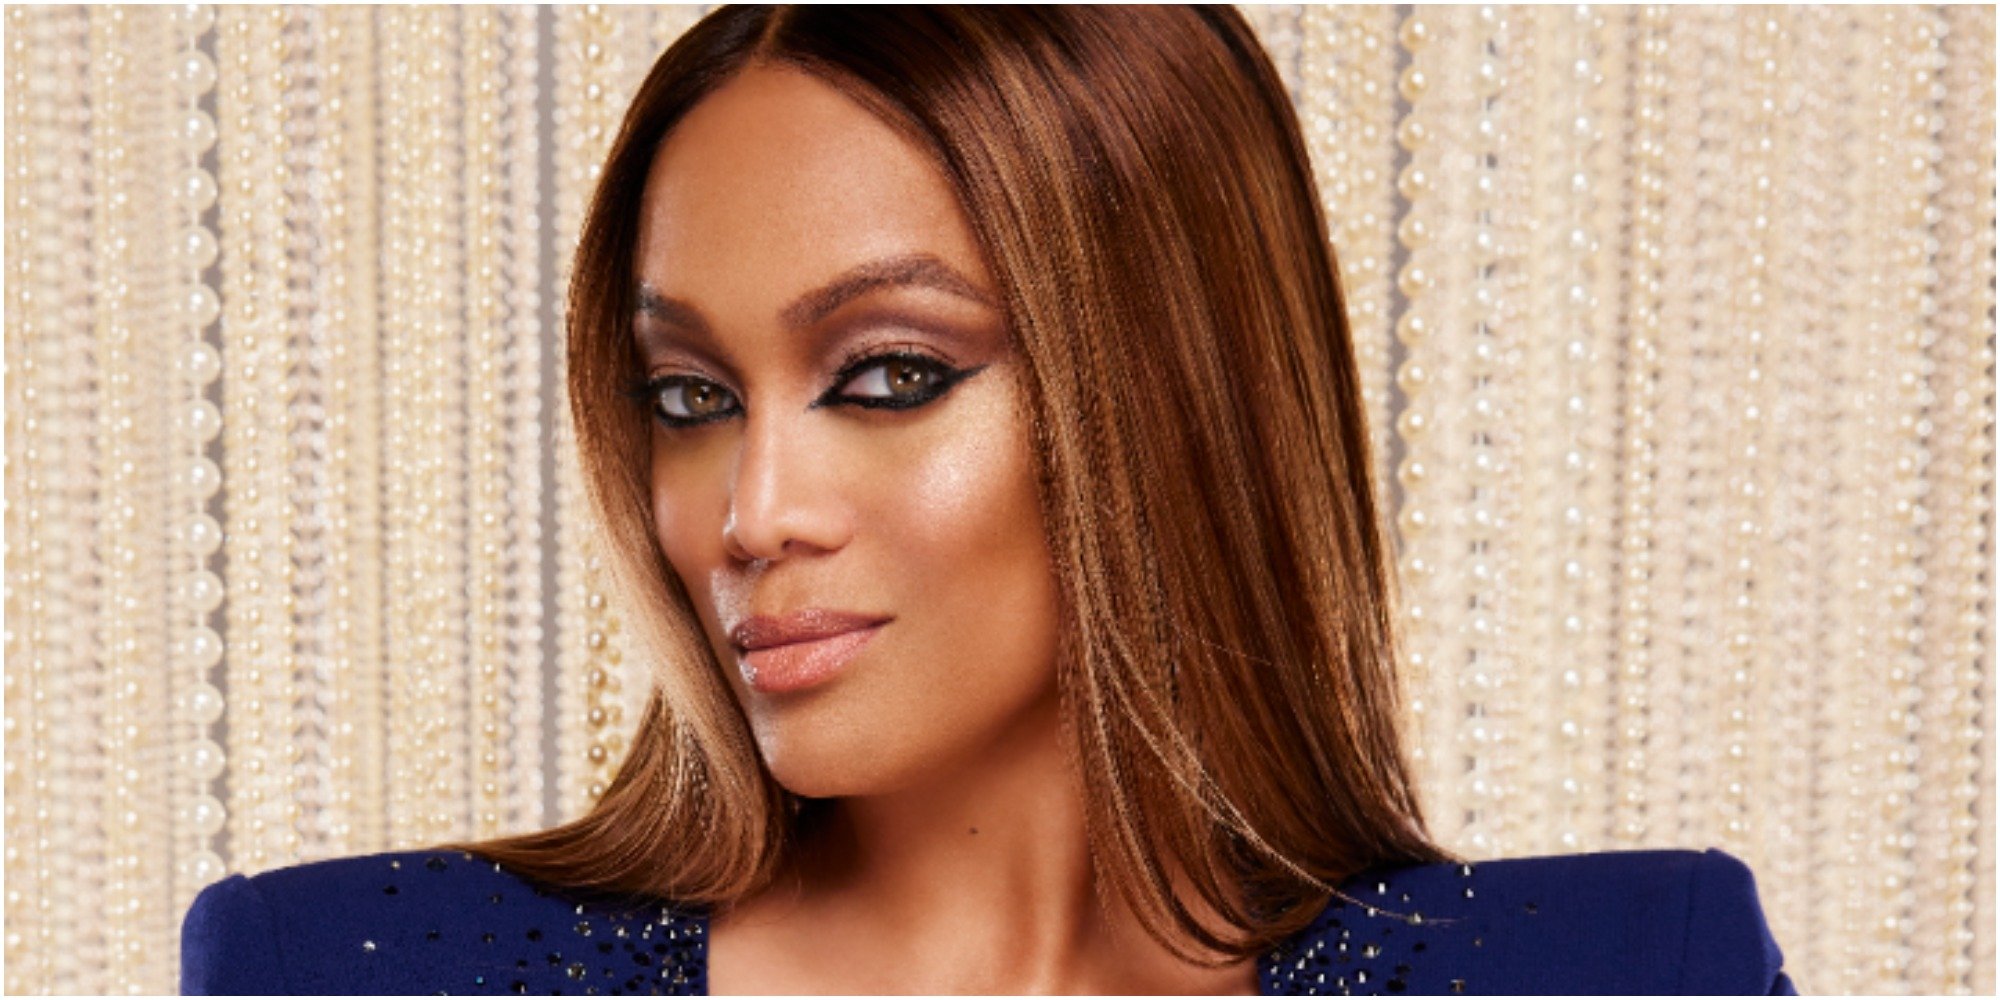 Tyra Banks continues to draw the ire of fans of "Dancing With the Stars" who do not want to see her on the show.